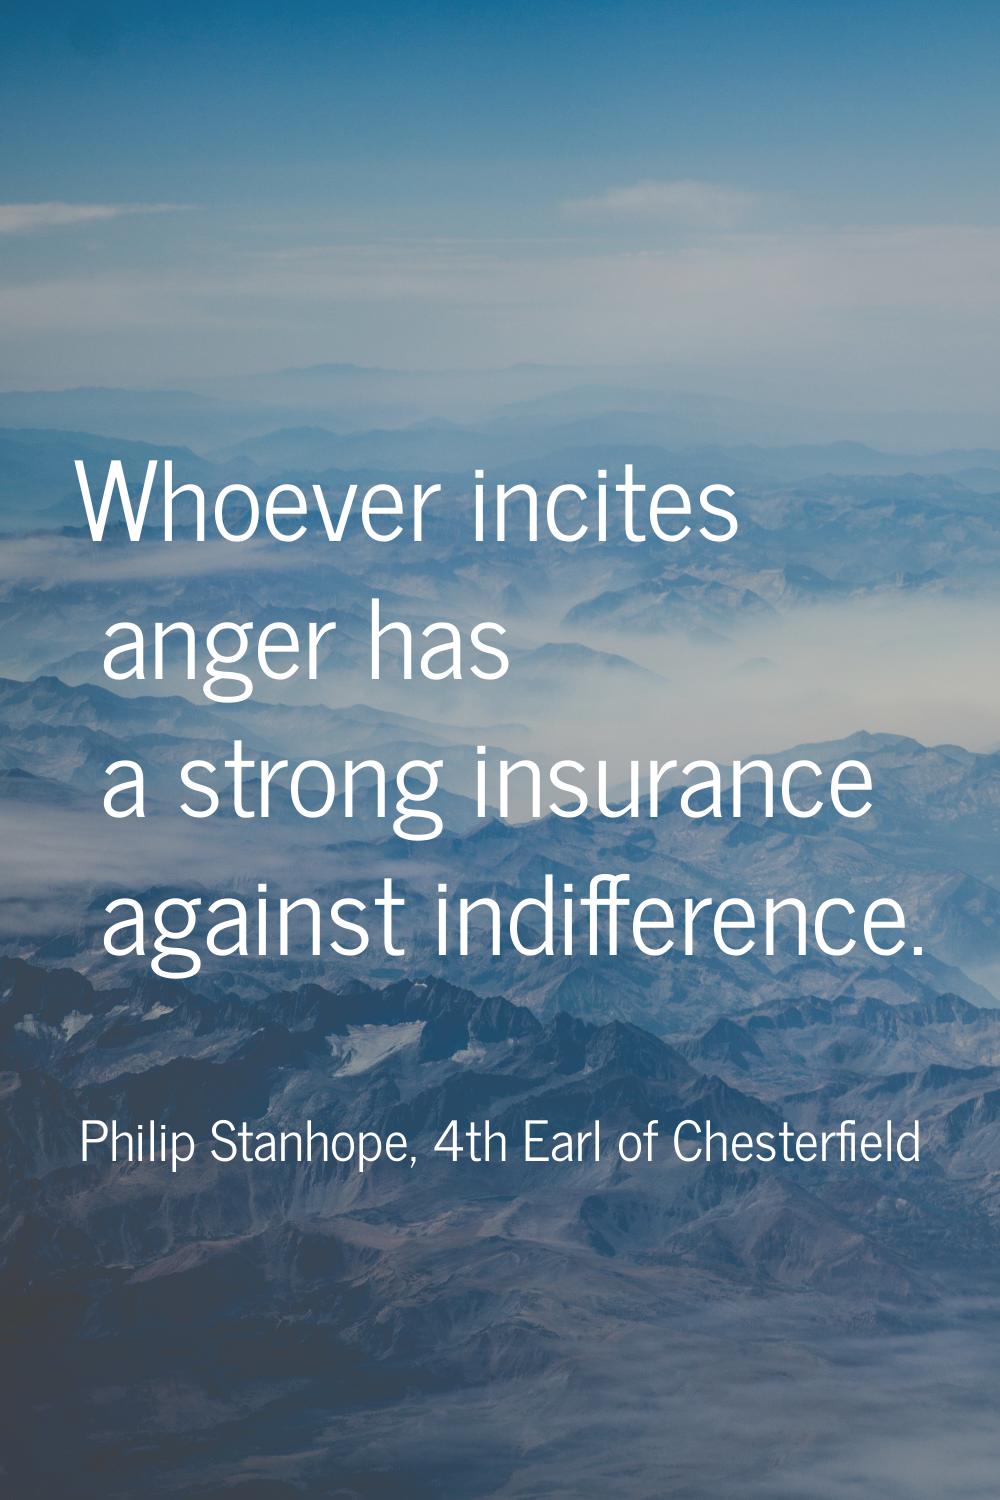 Whoever incites anger has a strong insurance against indifference.